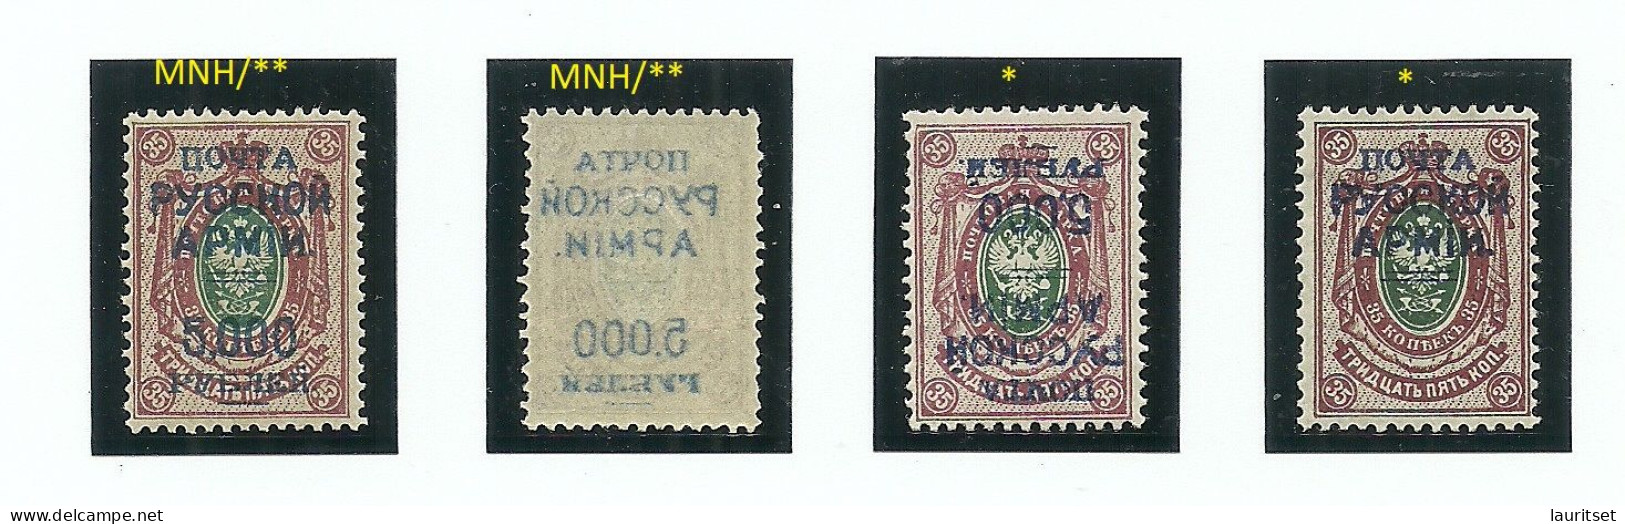 RUSSLAND RUSSIA 1920 Wrangel Army Gallipoli OPT MNH/MH : Normal + 3 Varieties (set Off & OPT Inverted + Partly Missing) - Wrangel Leger